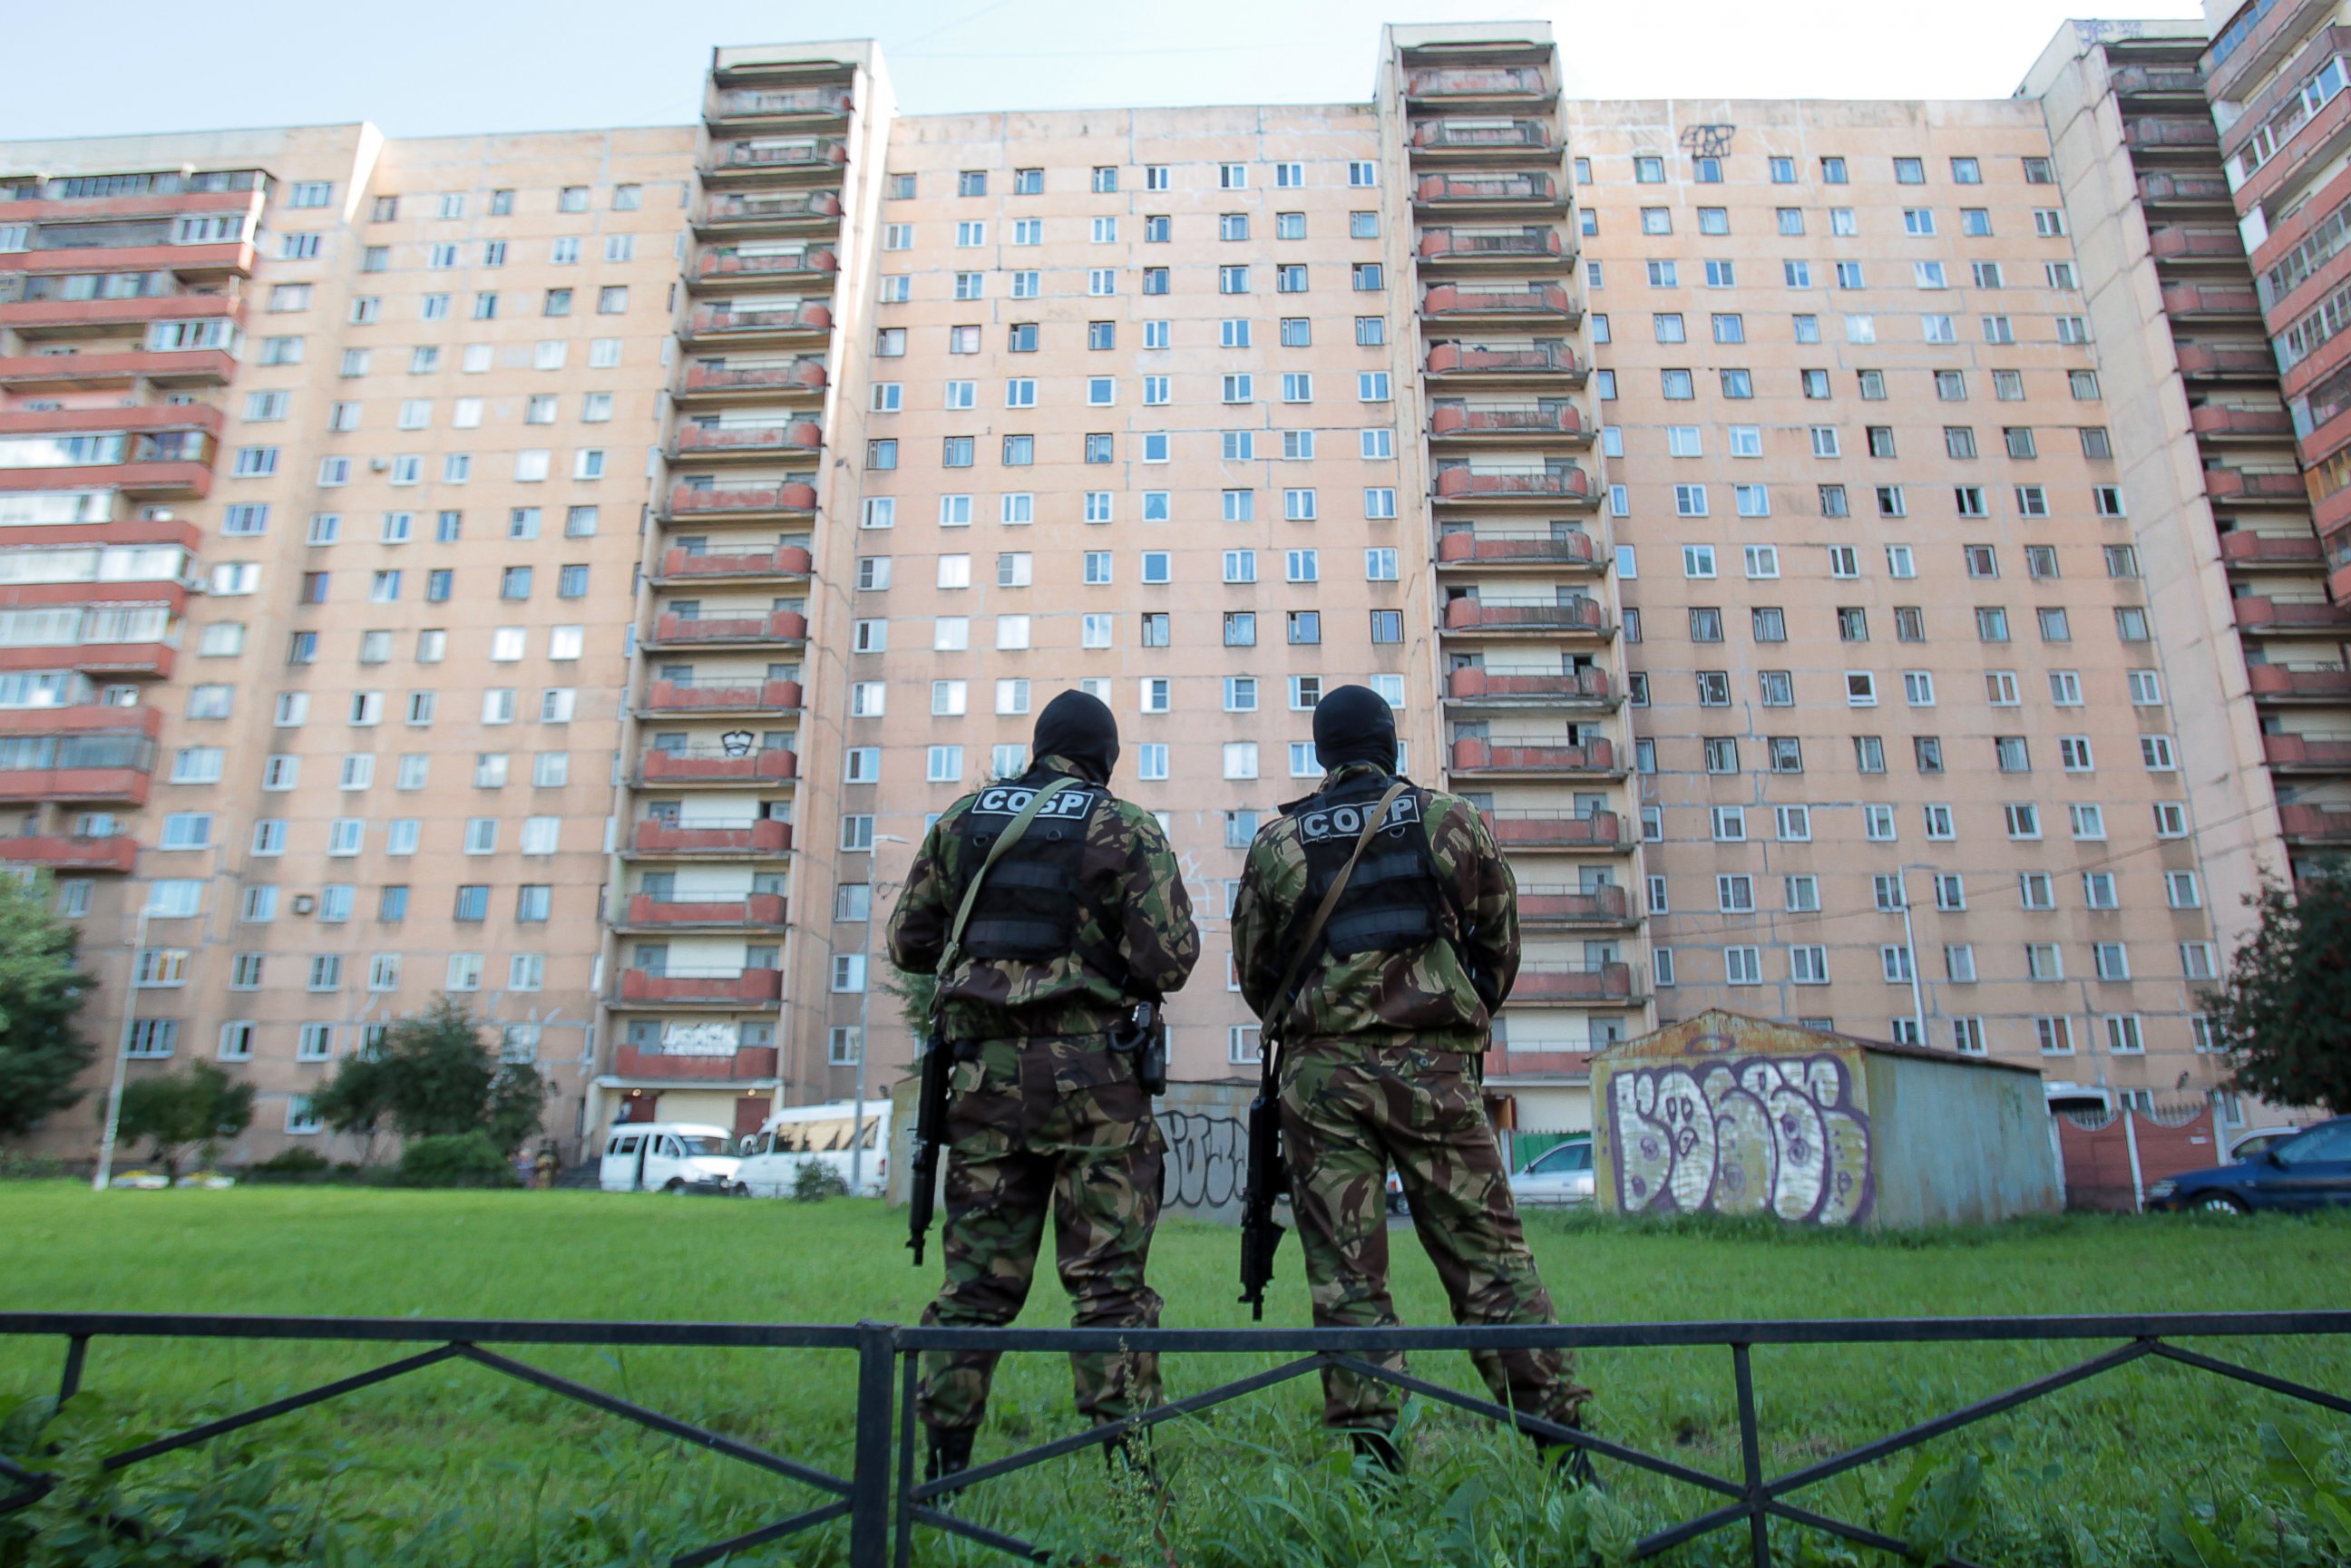 PHOTO: Members of the Special Rapid Response Unit are  seen outside a residential house in Leninsky Avenue during a counterterrorism operation conducted by the Russian Federal Security Service, Aug. 17, 2016.